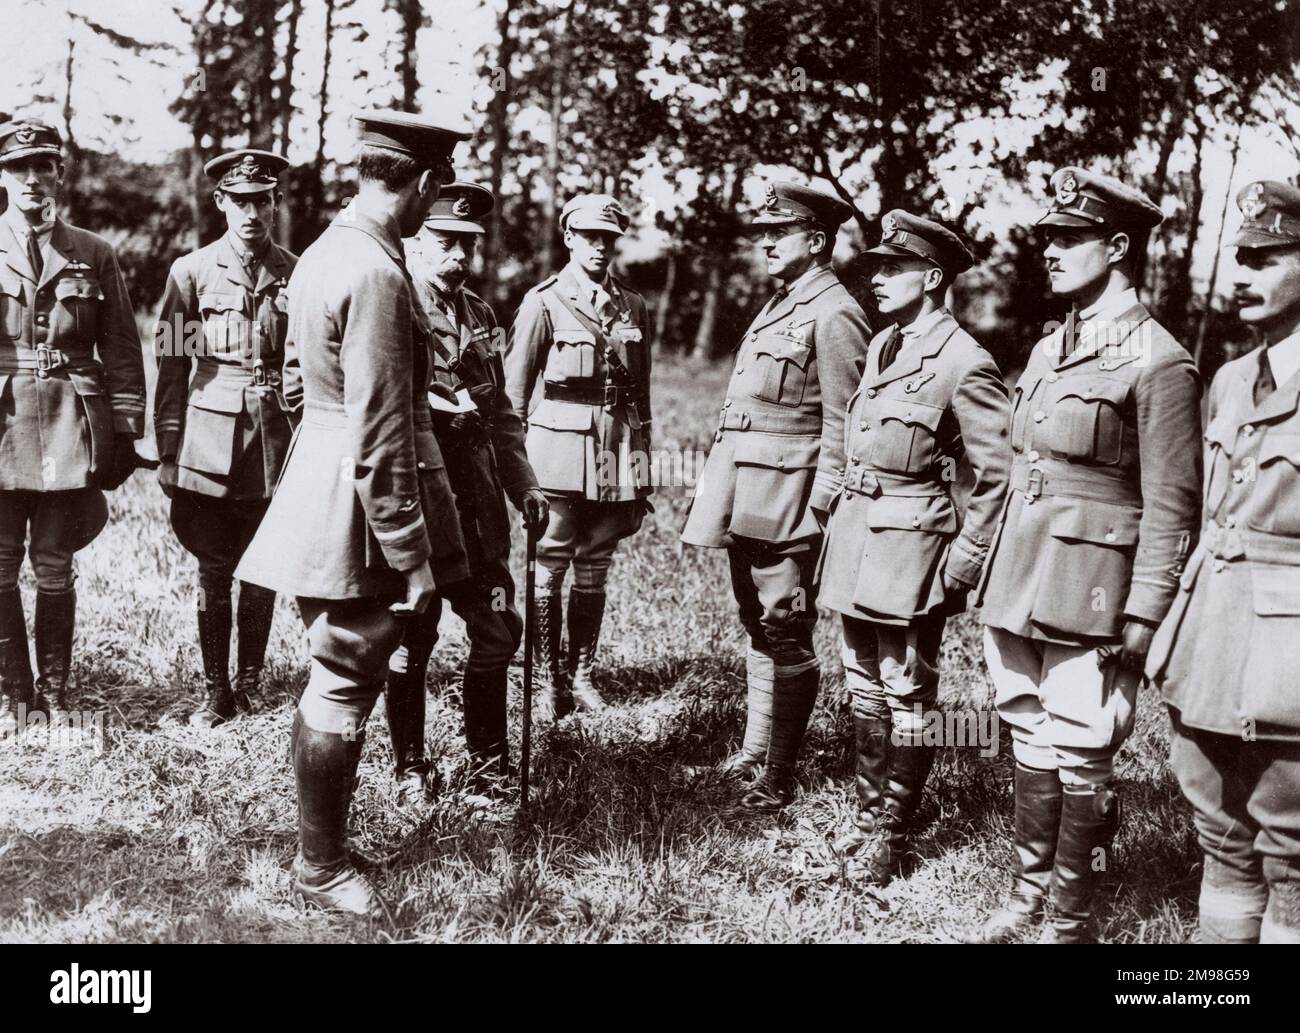 King George V inspecting RAF officers on the Western Front in France during World War One, August 1918. The men belonged to the 11th and 2nd Balloon Wings (air reconnaissance). Stock Photo